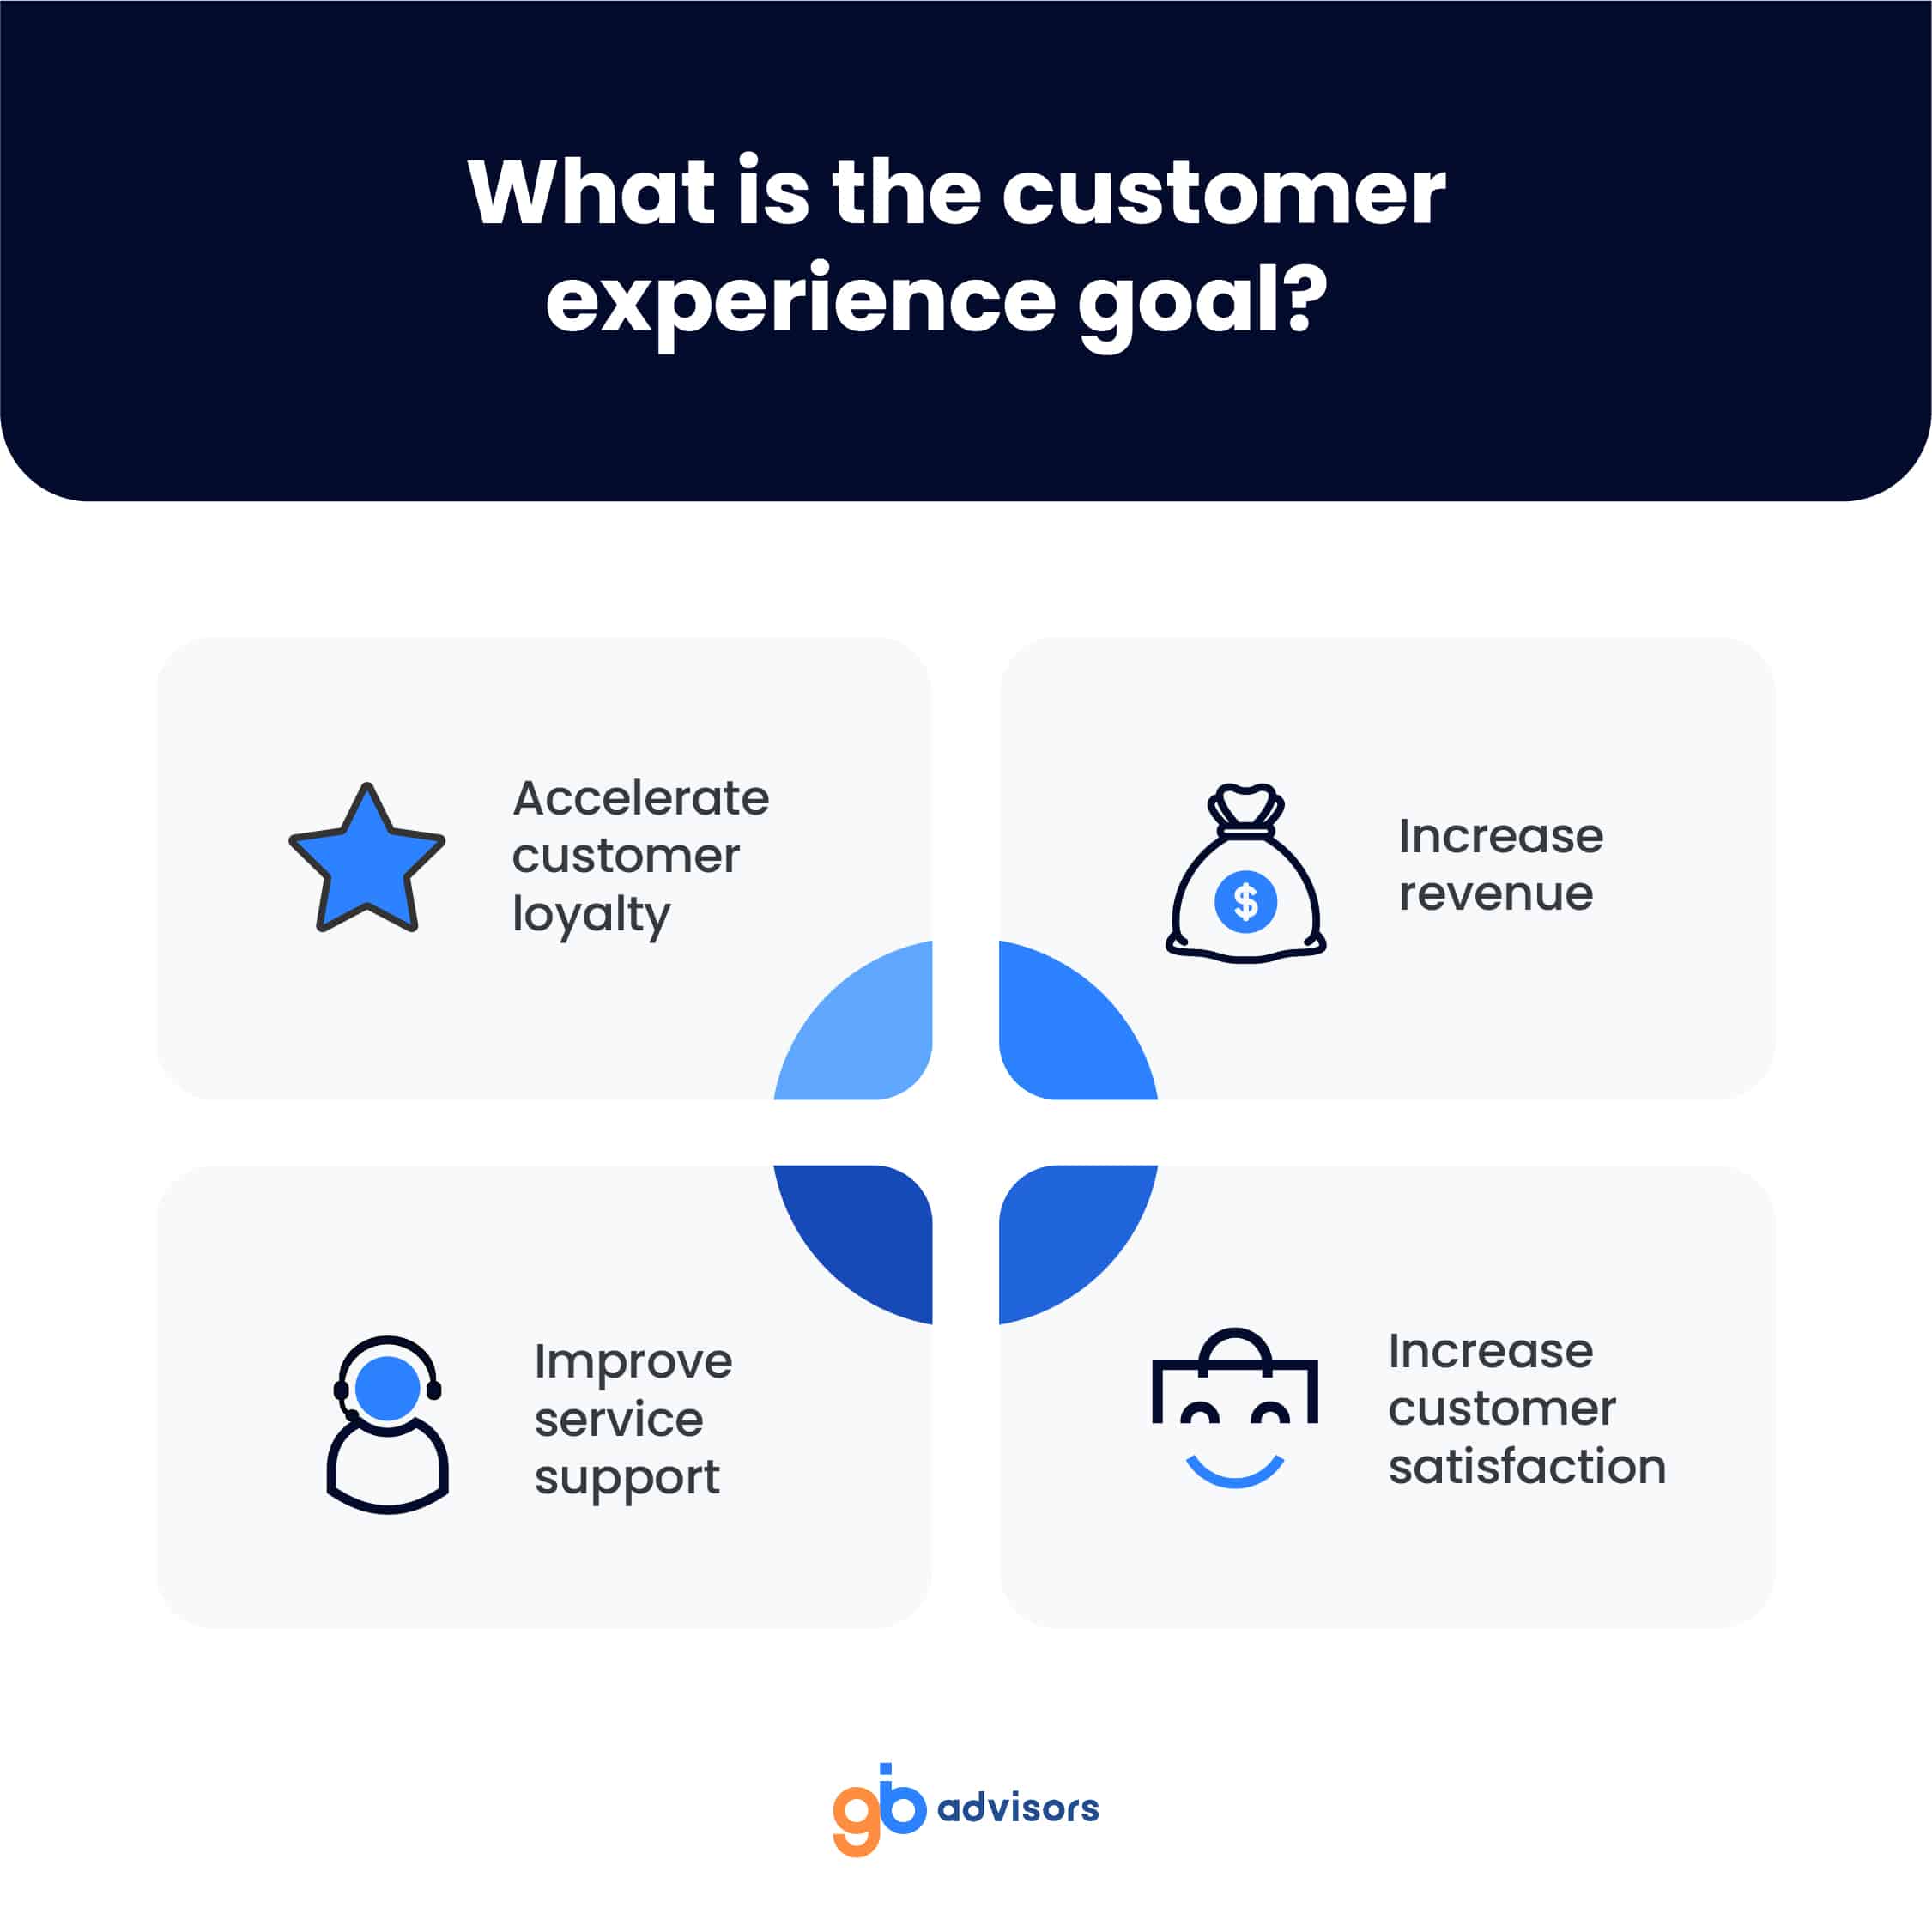 What is the goal of the customer experience?